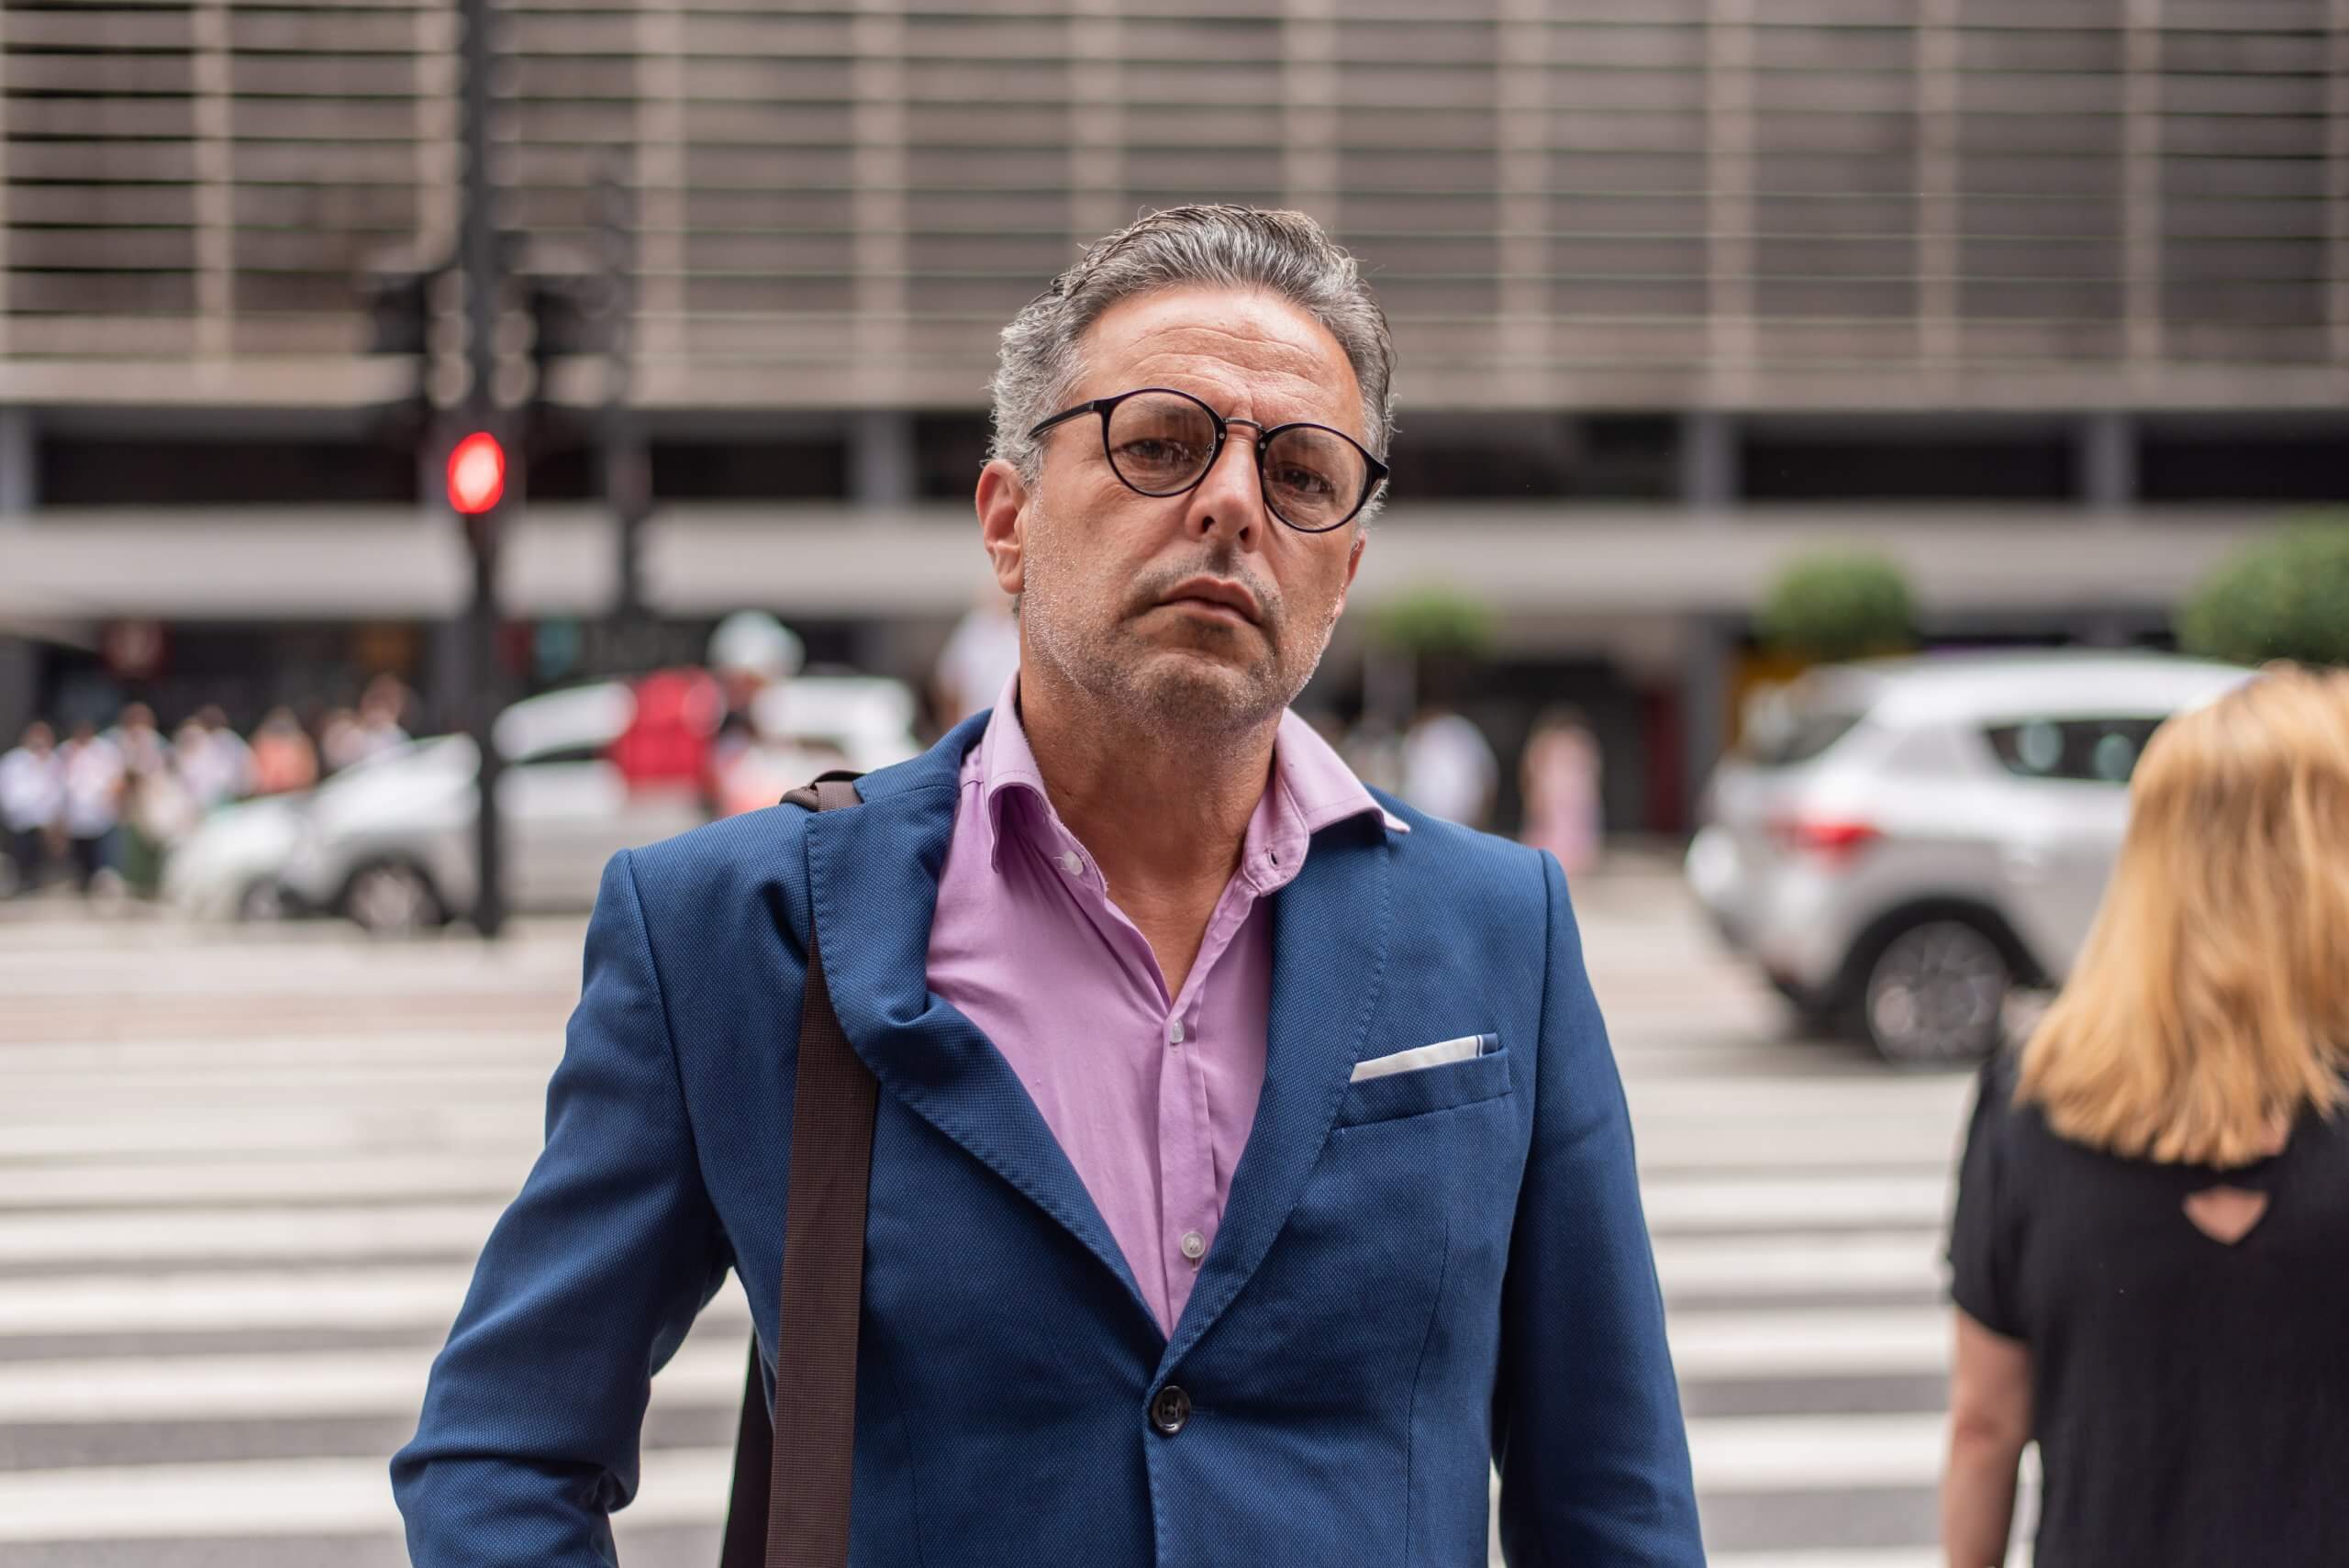 Suit-wearing man with glasses on the street looking into camera